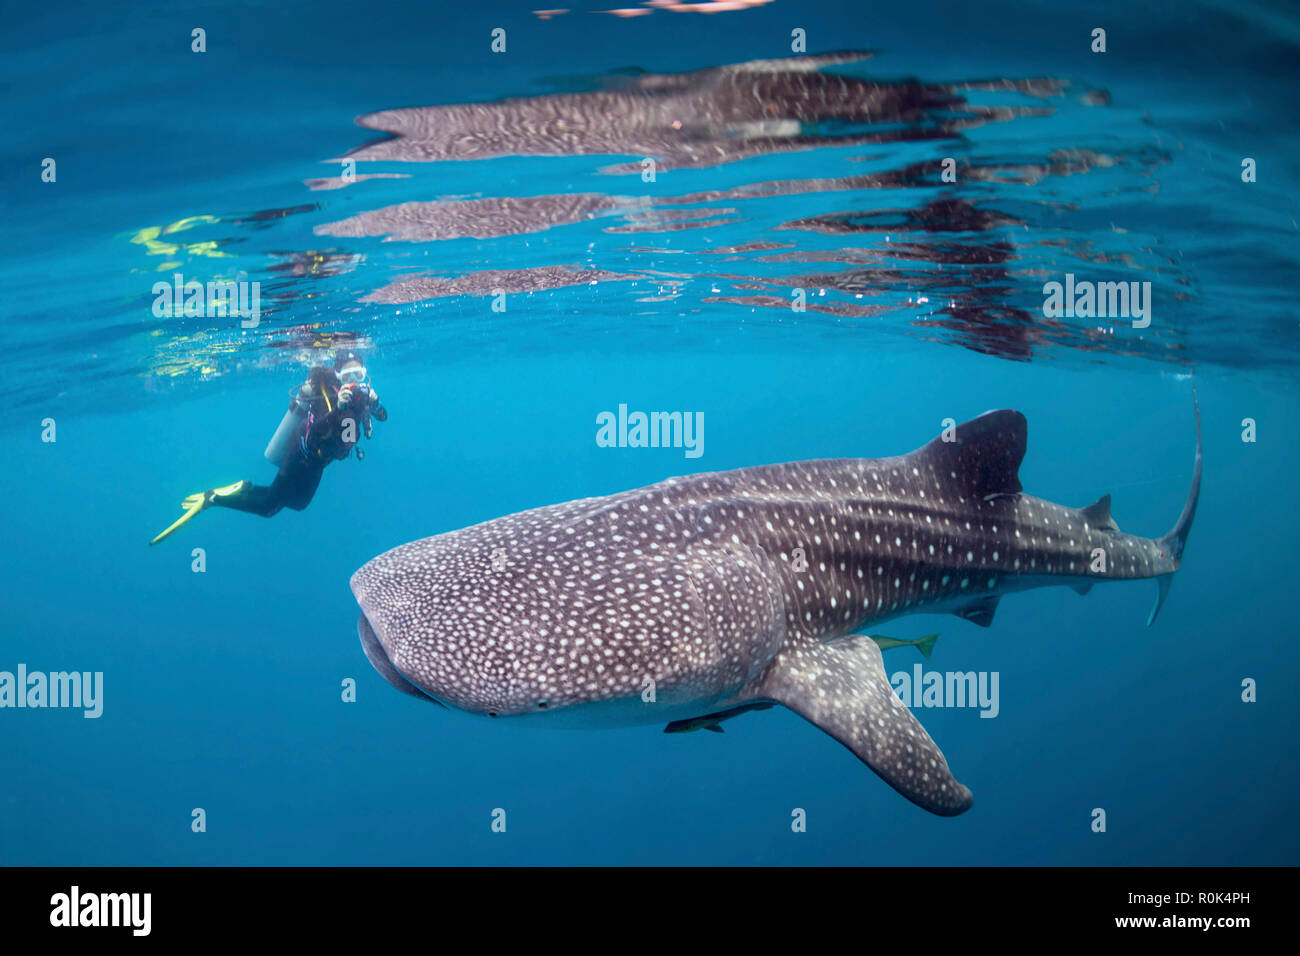 Diver photographing a whale shark. Stock Photo